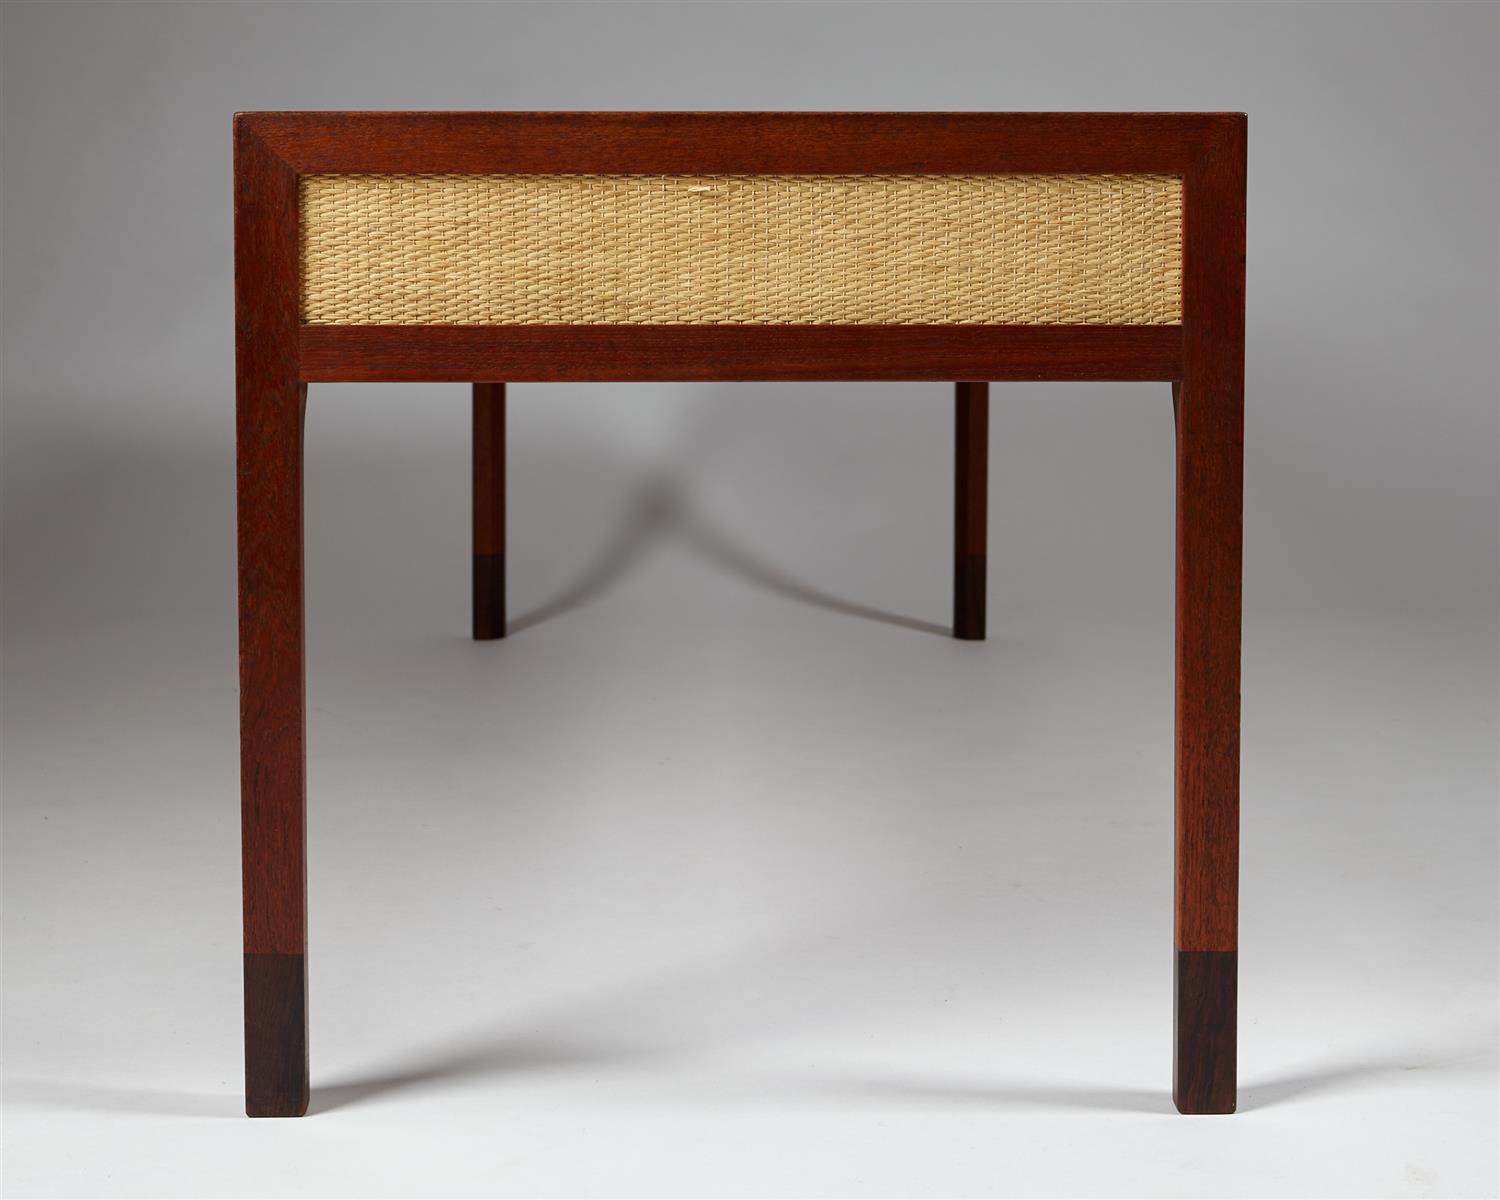 Mid-20th Century Rosewood Occasional Table Designed by Mogens Lassen for T. Madsen, Denmark, 1953 For Sale